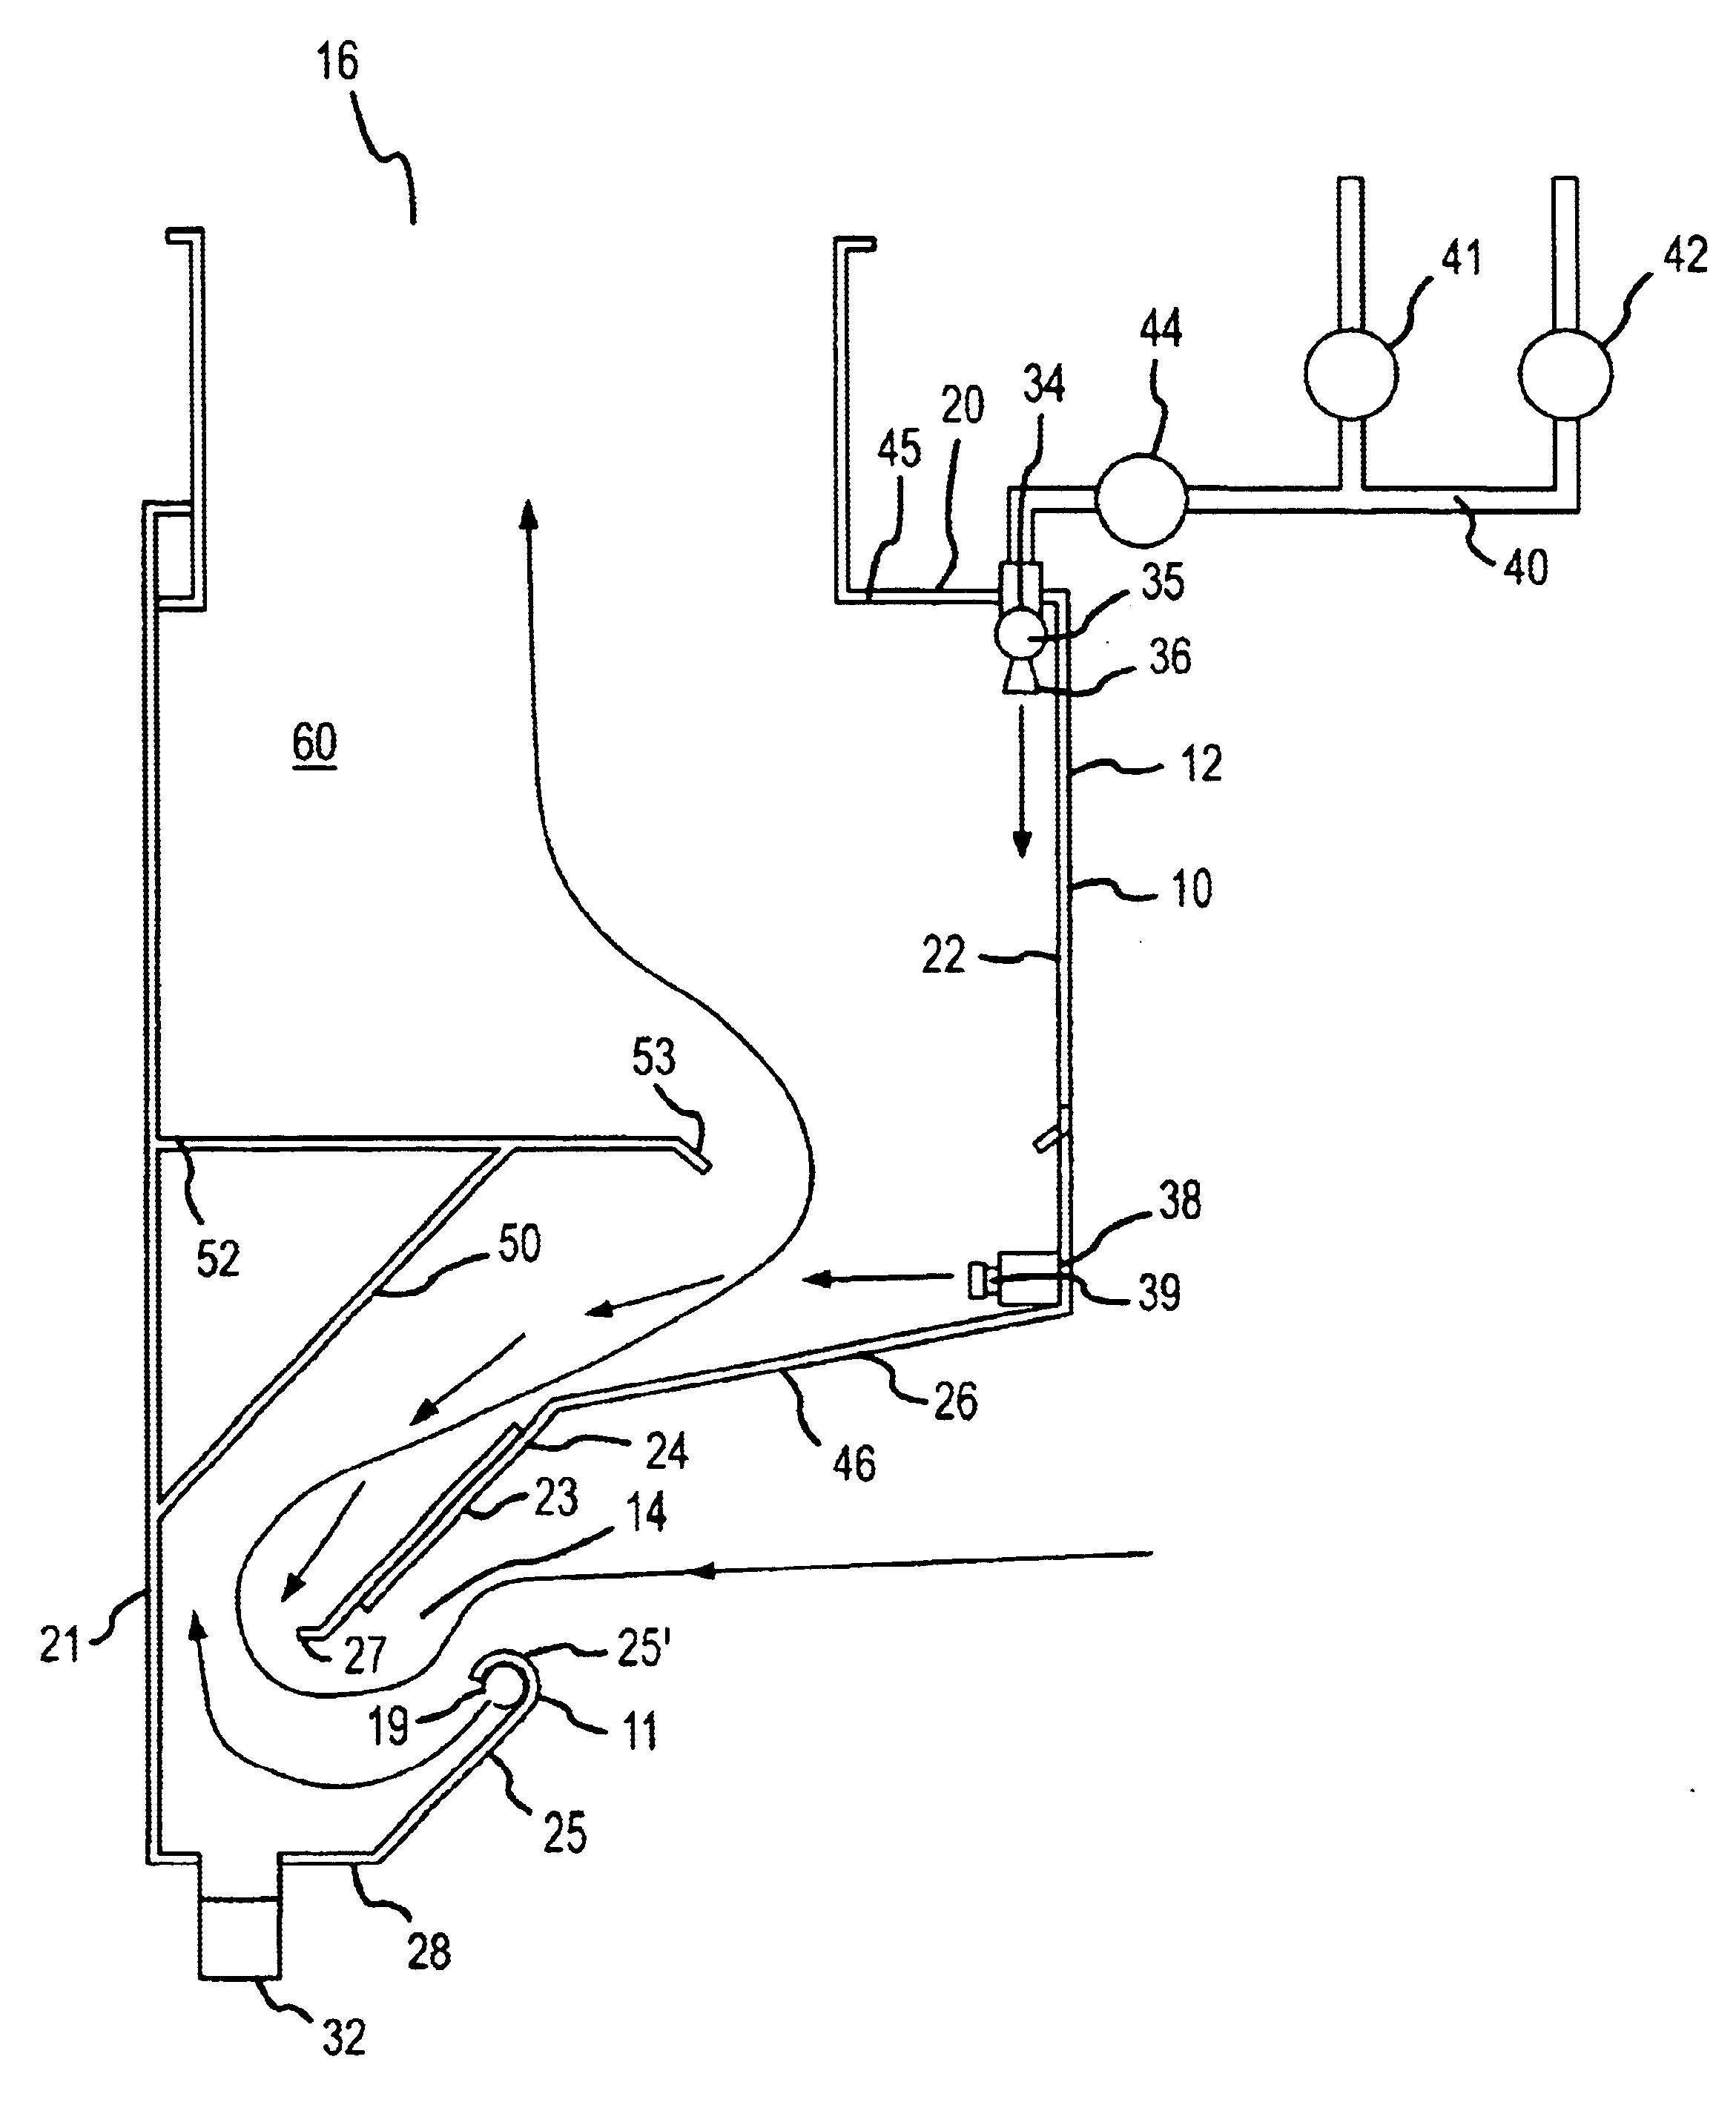 Method and apparatus for removal of grease, smoke and odor from exhaust systems